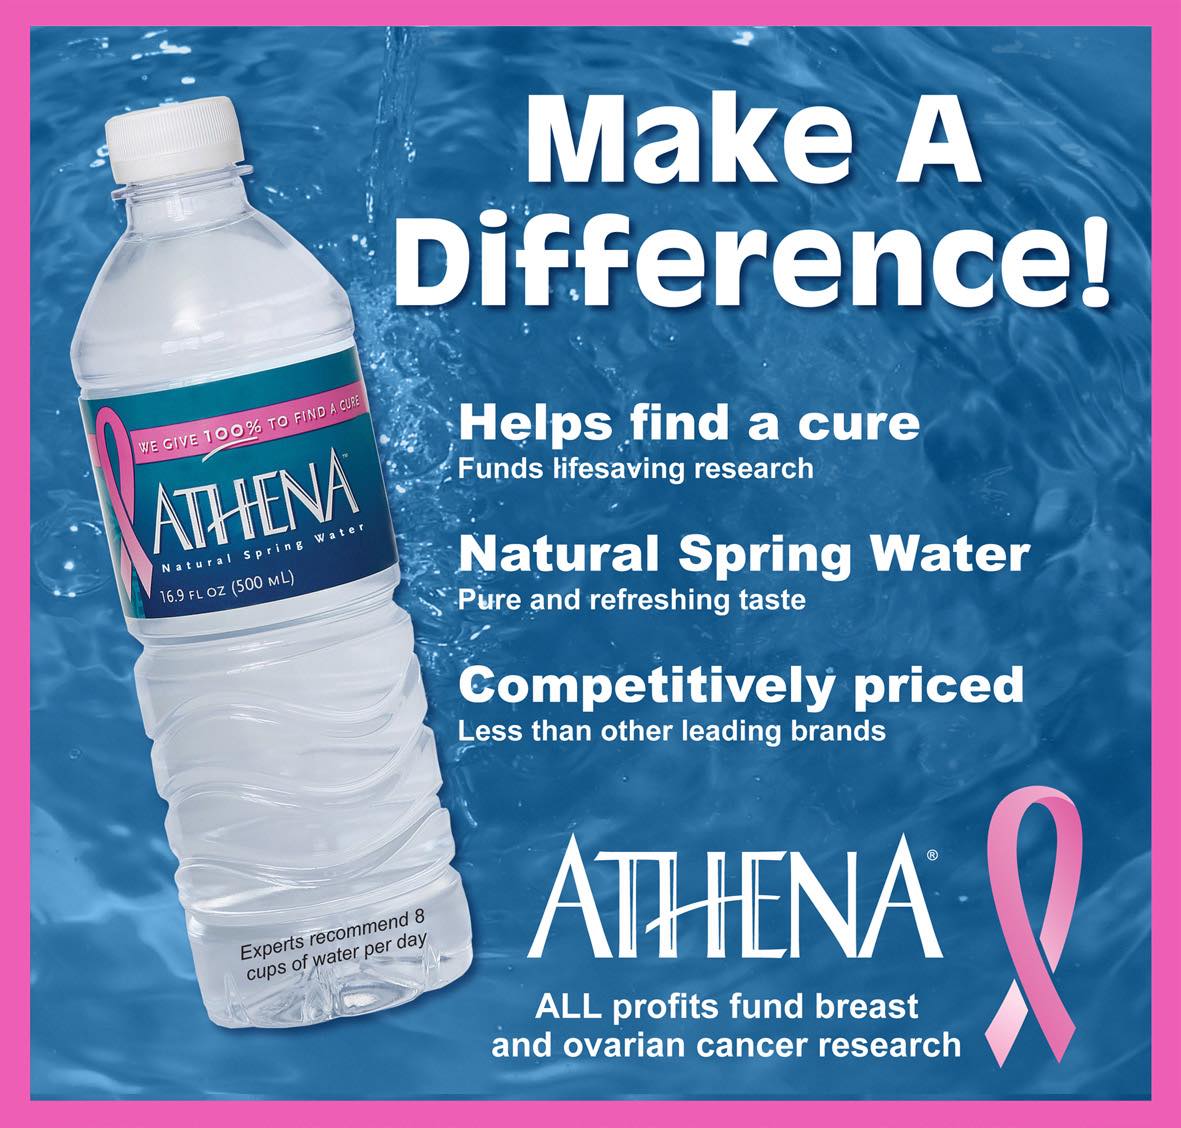 DS Waters acquires Athena bottled water